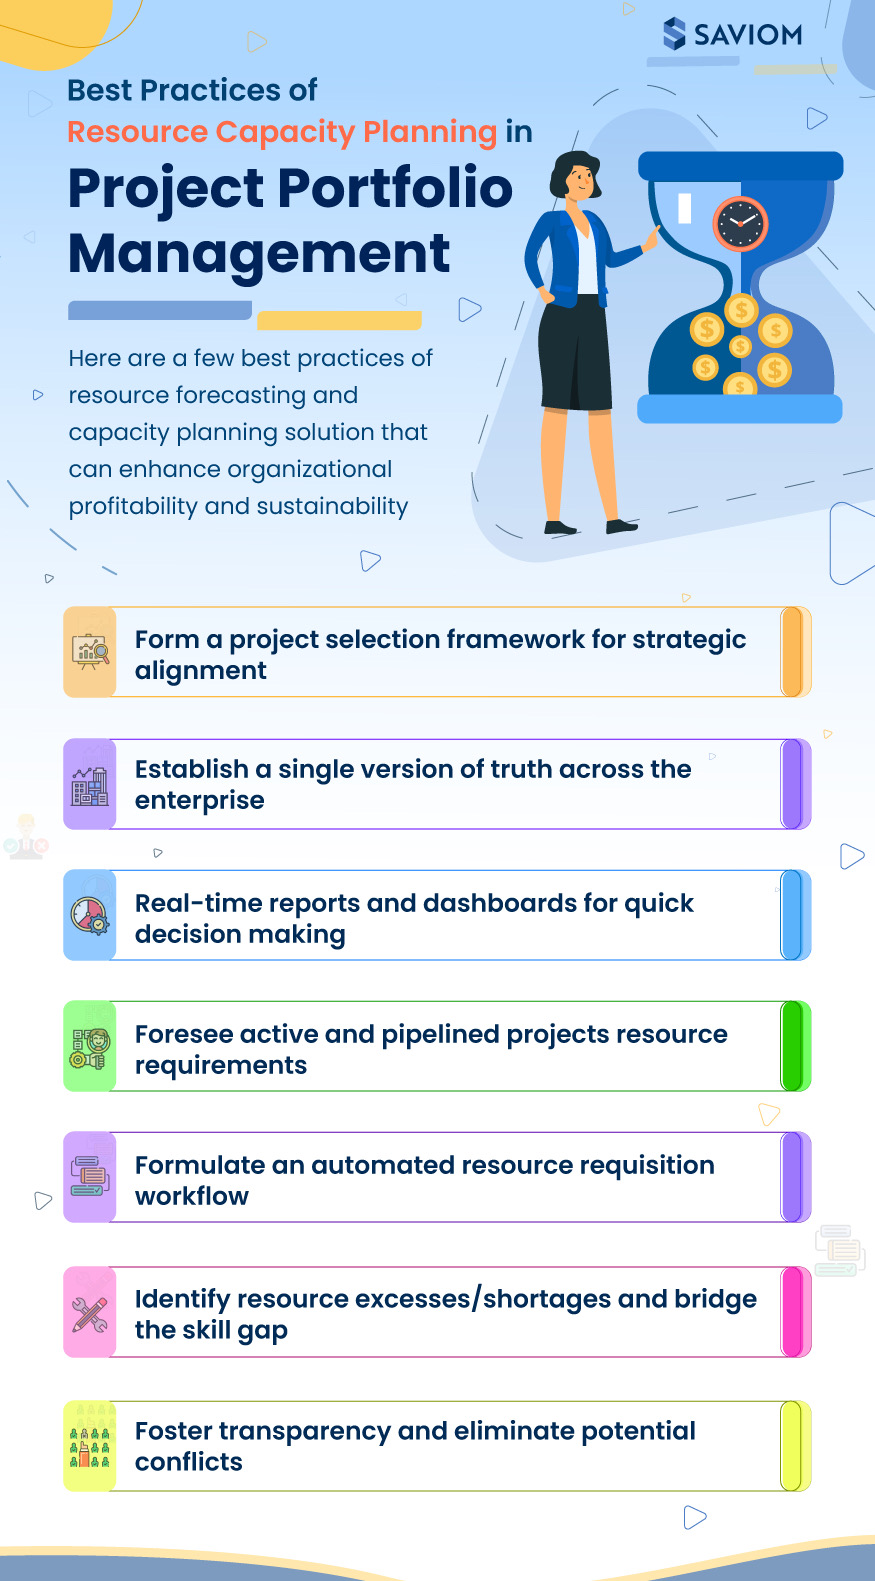 Project Portfolio Management- How Resource Capacity Planning can be a Game-Changer 